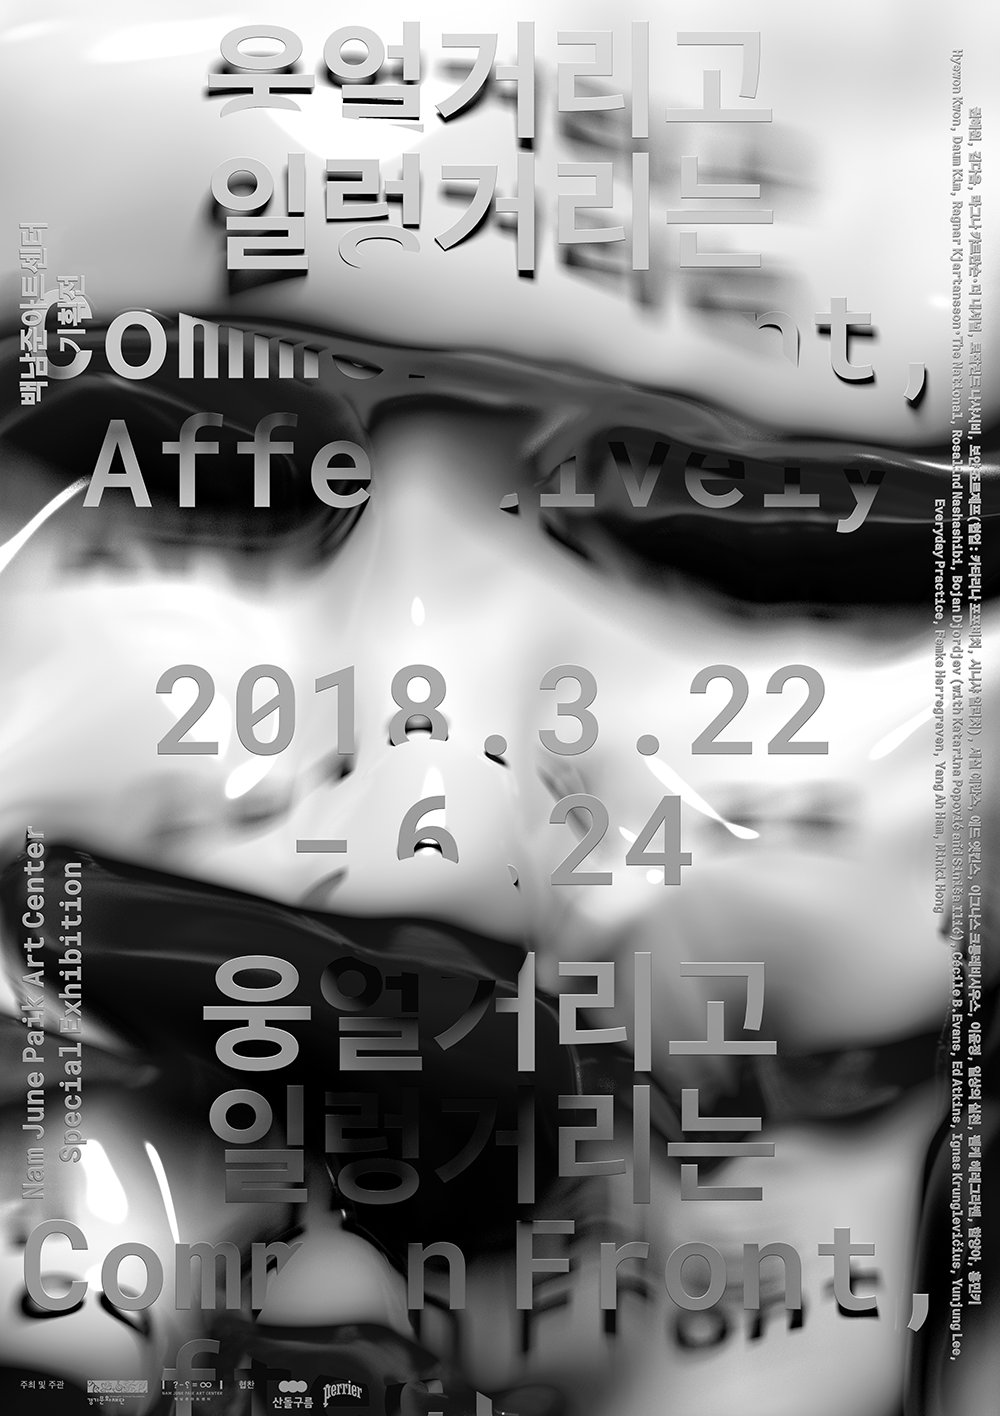 Special Exhibition 《Common Front, Affectively》